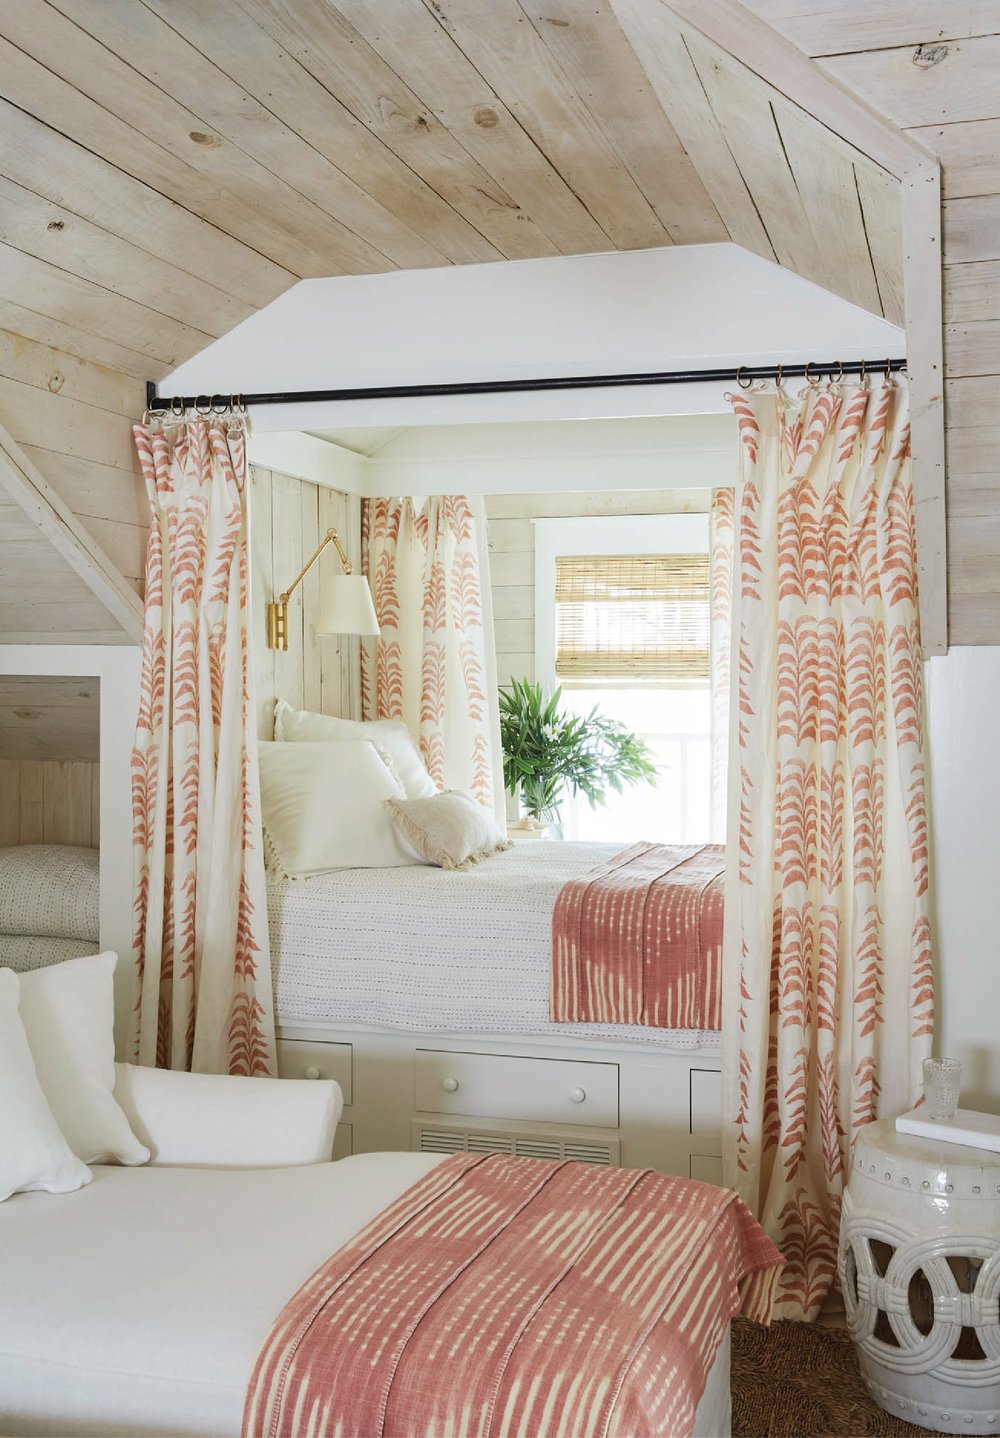 White and pink bedroom featured in interiors designed by Heather Chadduck